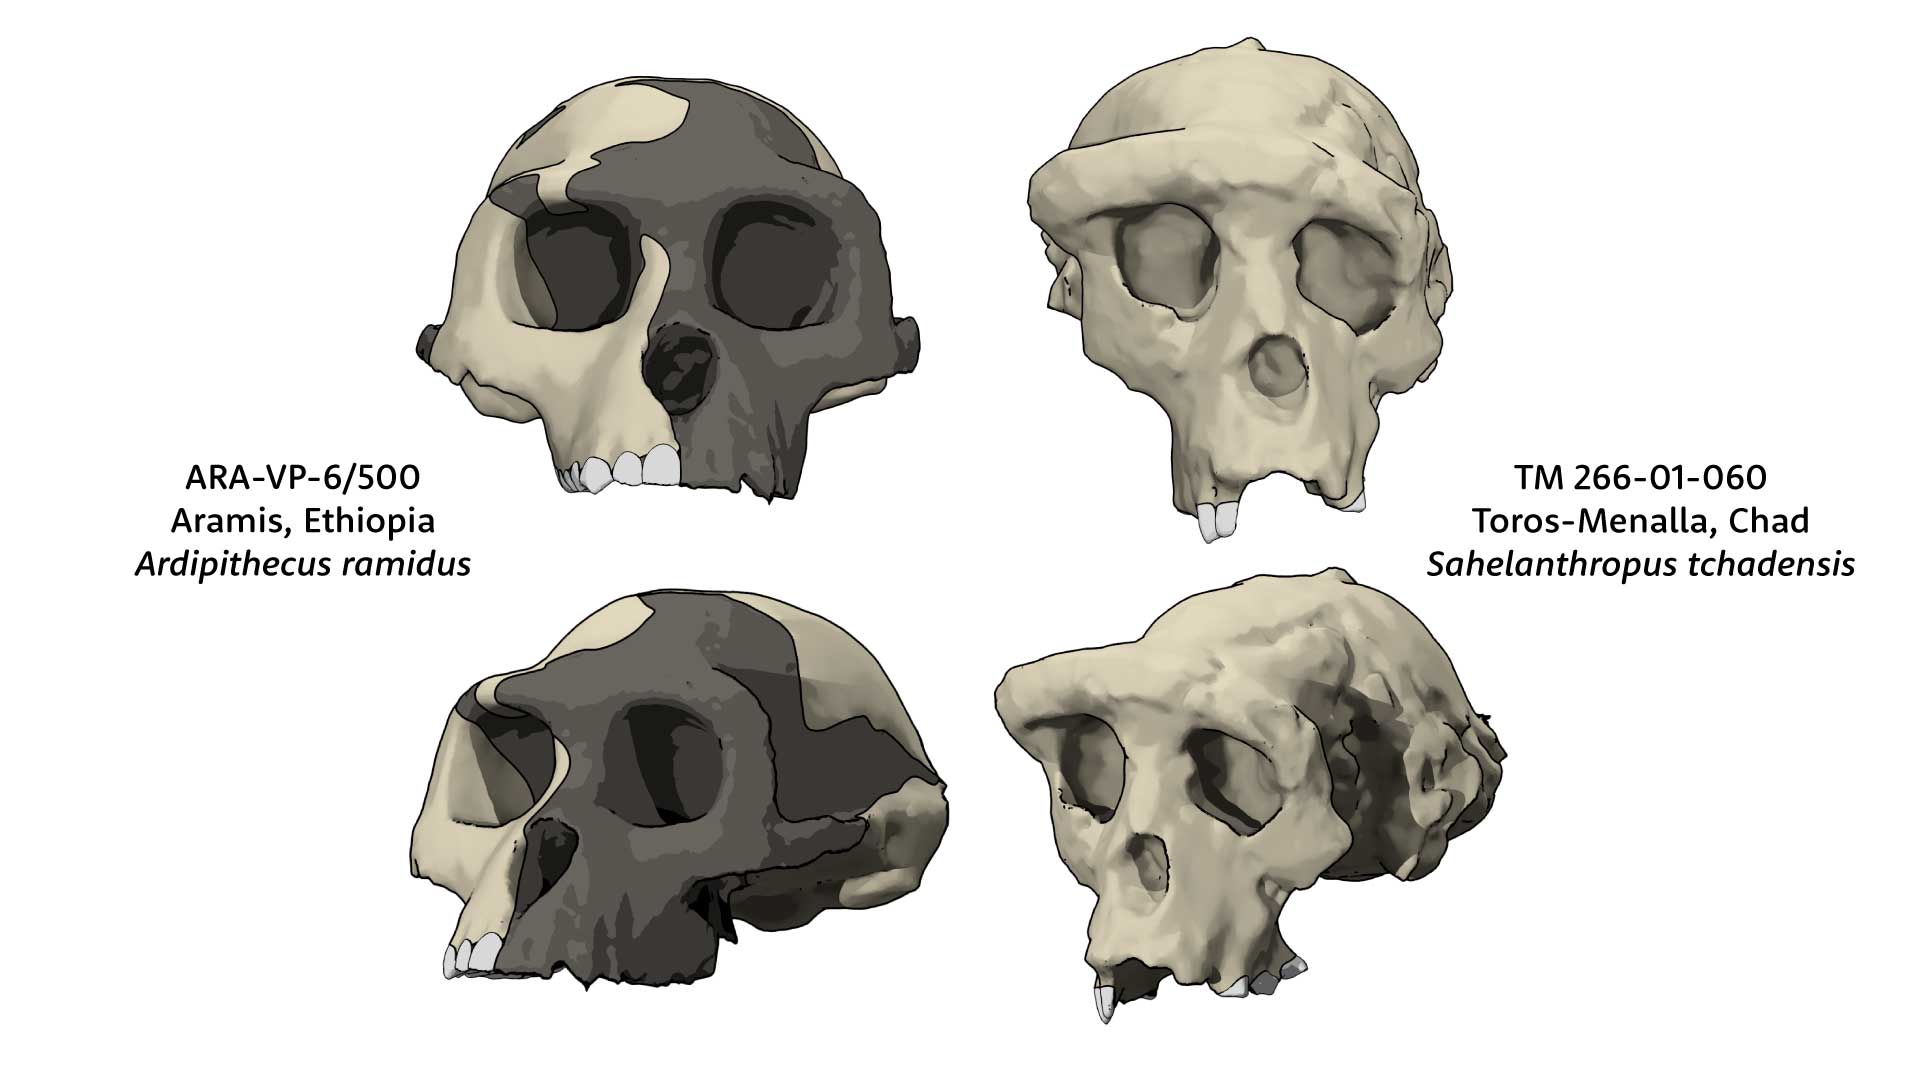 Two skulls in two views; ARA-VP-6/500 on left and TM 266-01-060 on right